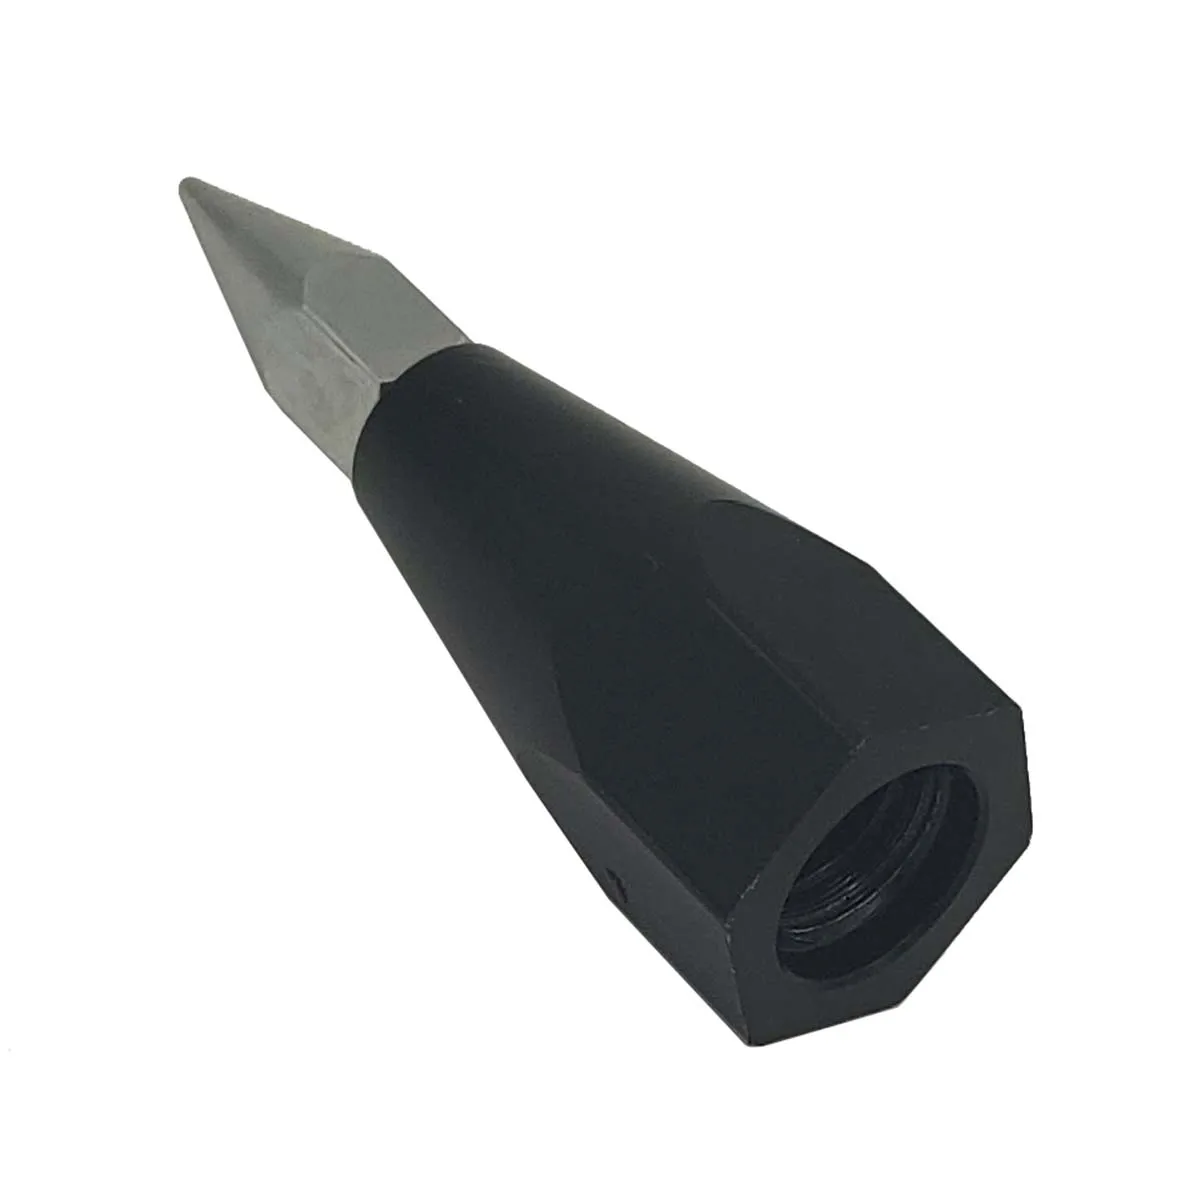 NEW Prism Pole sharp Point with Replaceable Tip 5/8 Internal thread ,Surveying Rod prism pole point